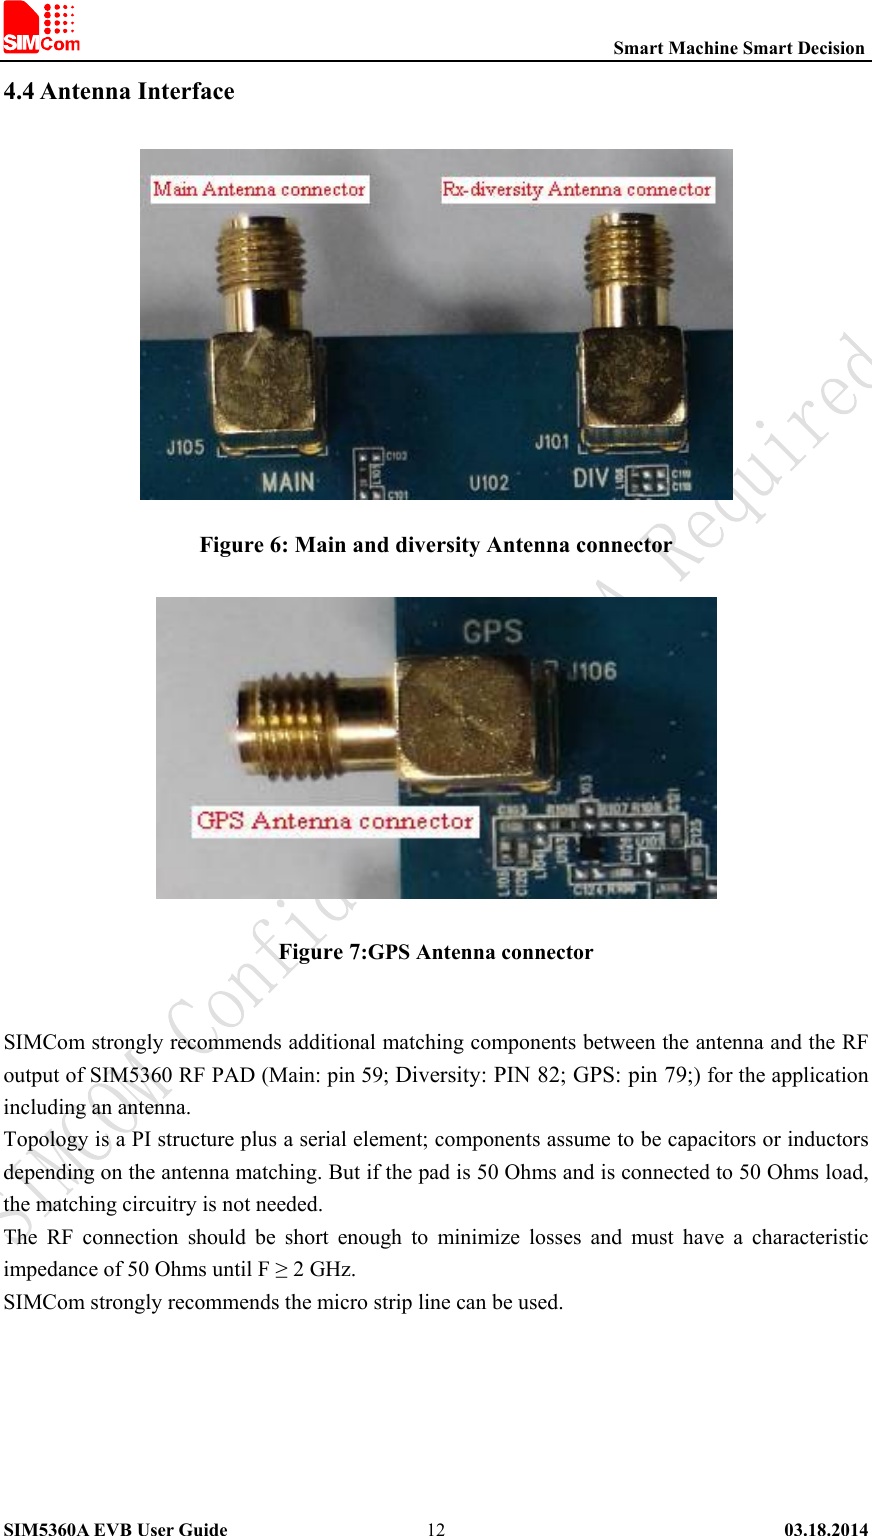                                                          Smart Machine Smart Decision SIM5360A EVB User Guide   03.18.2014   124.4 Antenna Interface  Figure 6: Main and diversity Antenna connector  Figure 7:GPS Antenna connector  SIMCom strongly recommends additional matching components between the antenna and the RF output of SIM5360 RF PAD (Main: pin 59; Diversity: PIN 82; GPS: pin 79;) for the application including an antenna. Topology is a PI structure plus a serial element; components assume to be capacitors or inductors depending on the antenna matching. But if the pad is 50 Ohms and is connected to 50 Ohms load, the matching circuitry is not needed. The  RF  connection  should  be  short  enough  to  minimize  losses  and  must  have  a  characteristic impedance of 50 Ohms until F ≥ 2 GHz.   SIMCom strongly recommends the micro strip line can be used.   